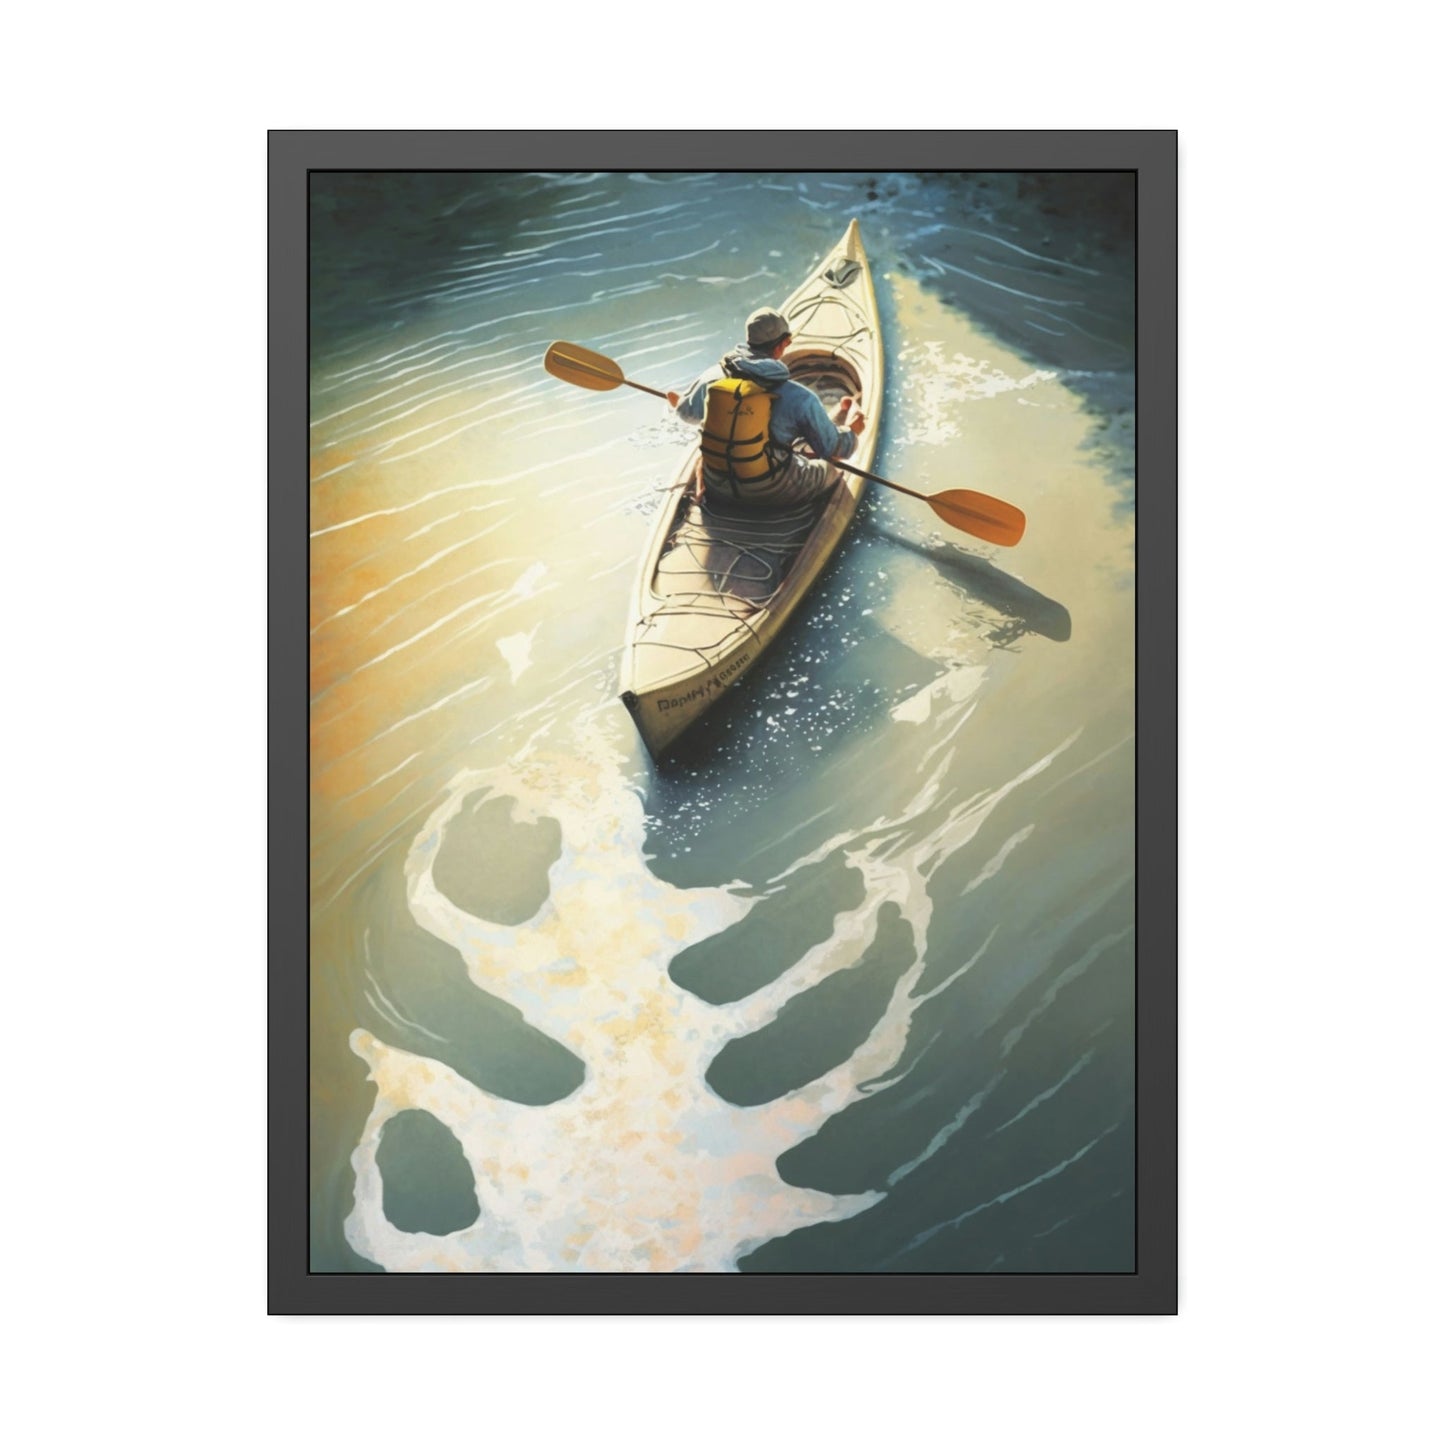 Boating Bliss: Wall Art and Print on Canvas with Relaxing Boating Art